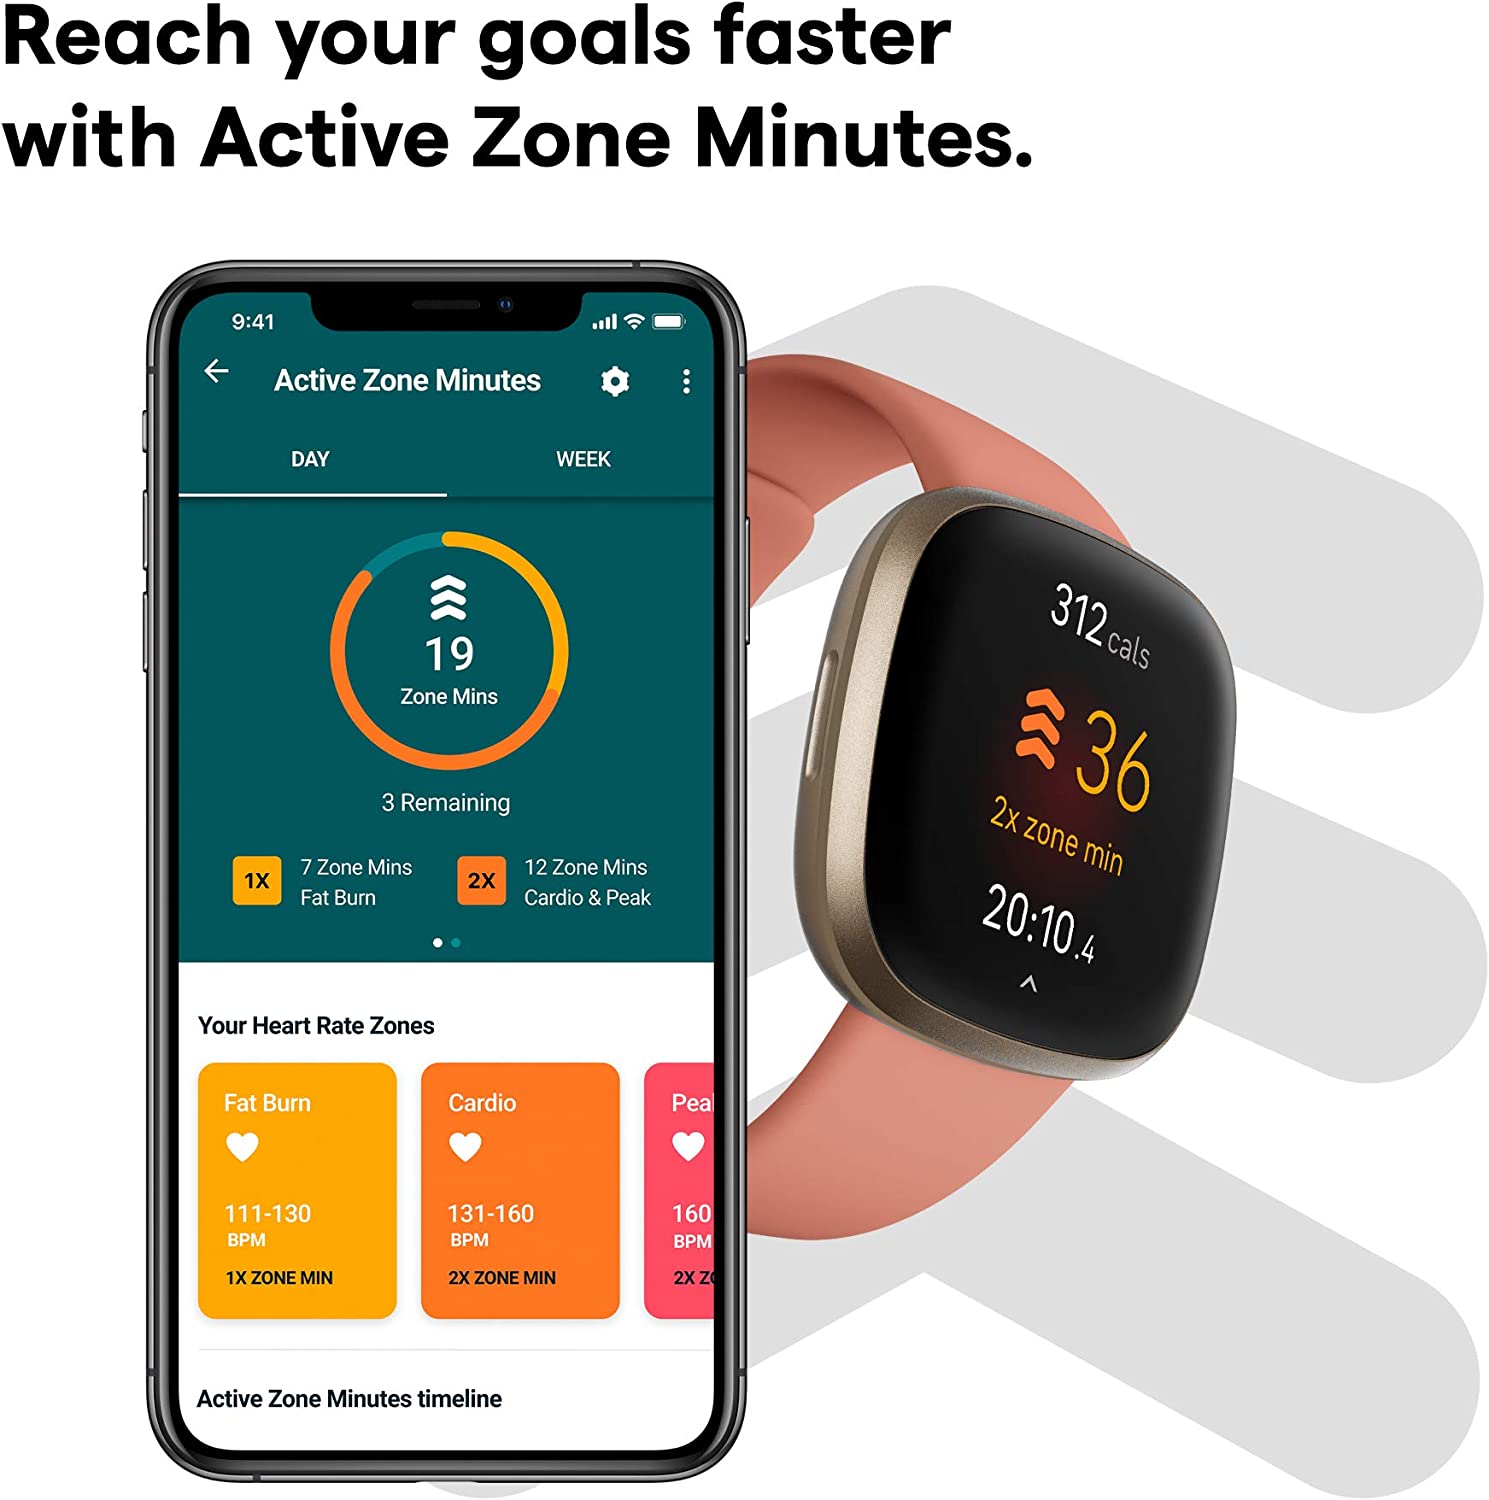 Fitbit Versa 3 Health & Fitness Smartwatch with GPS, 24/7 Heart Rate,